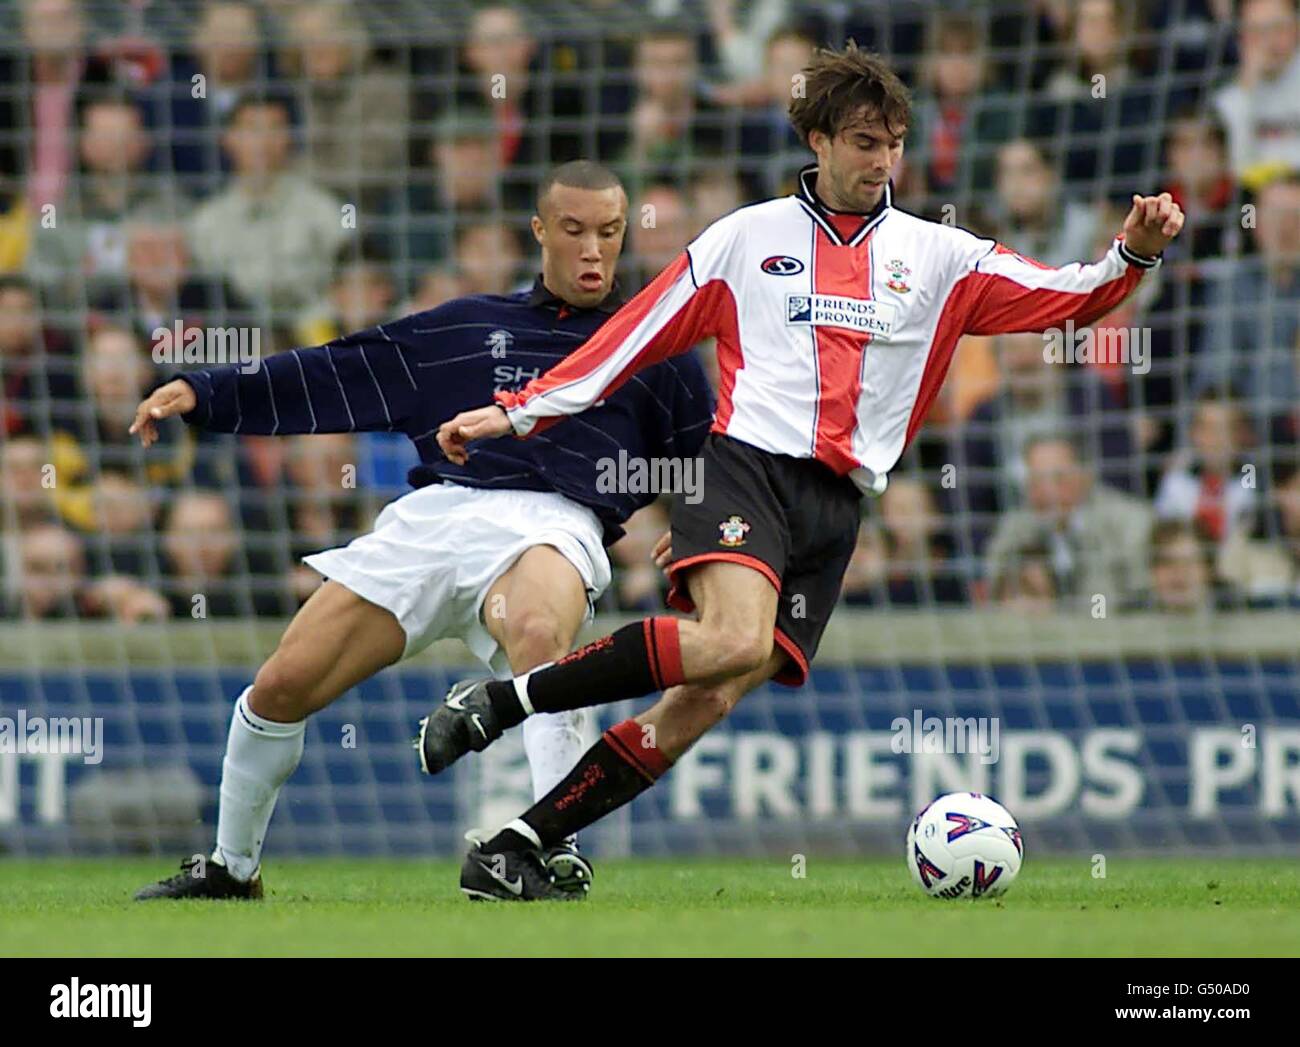 Manchester United's Mikael Silvestre (L) attempts to tackle Southampton's Jo Tessem during their FA Premiership match at The Dell. Final Score: Southampton 1 Man United 3. Stock Photo